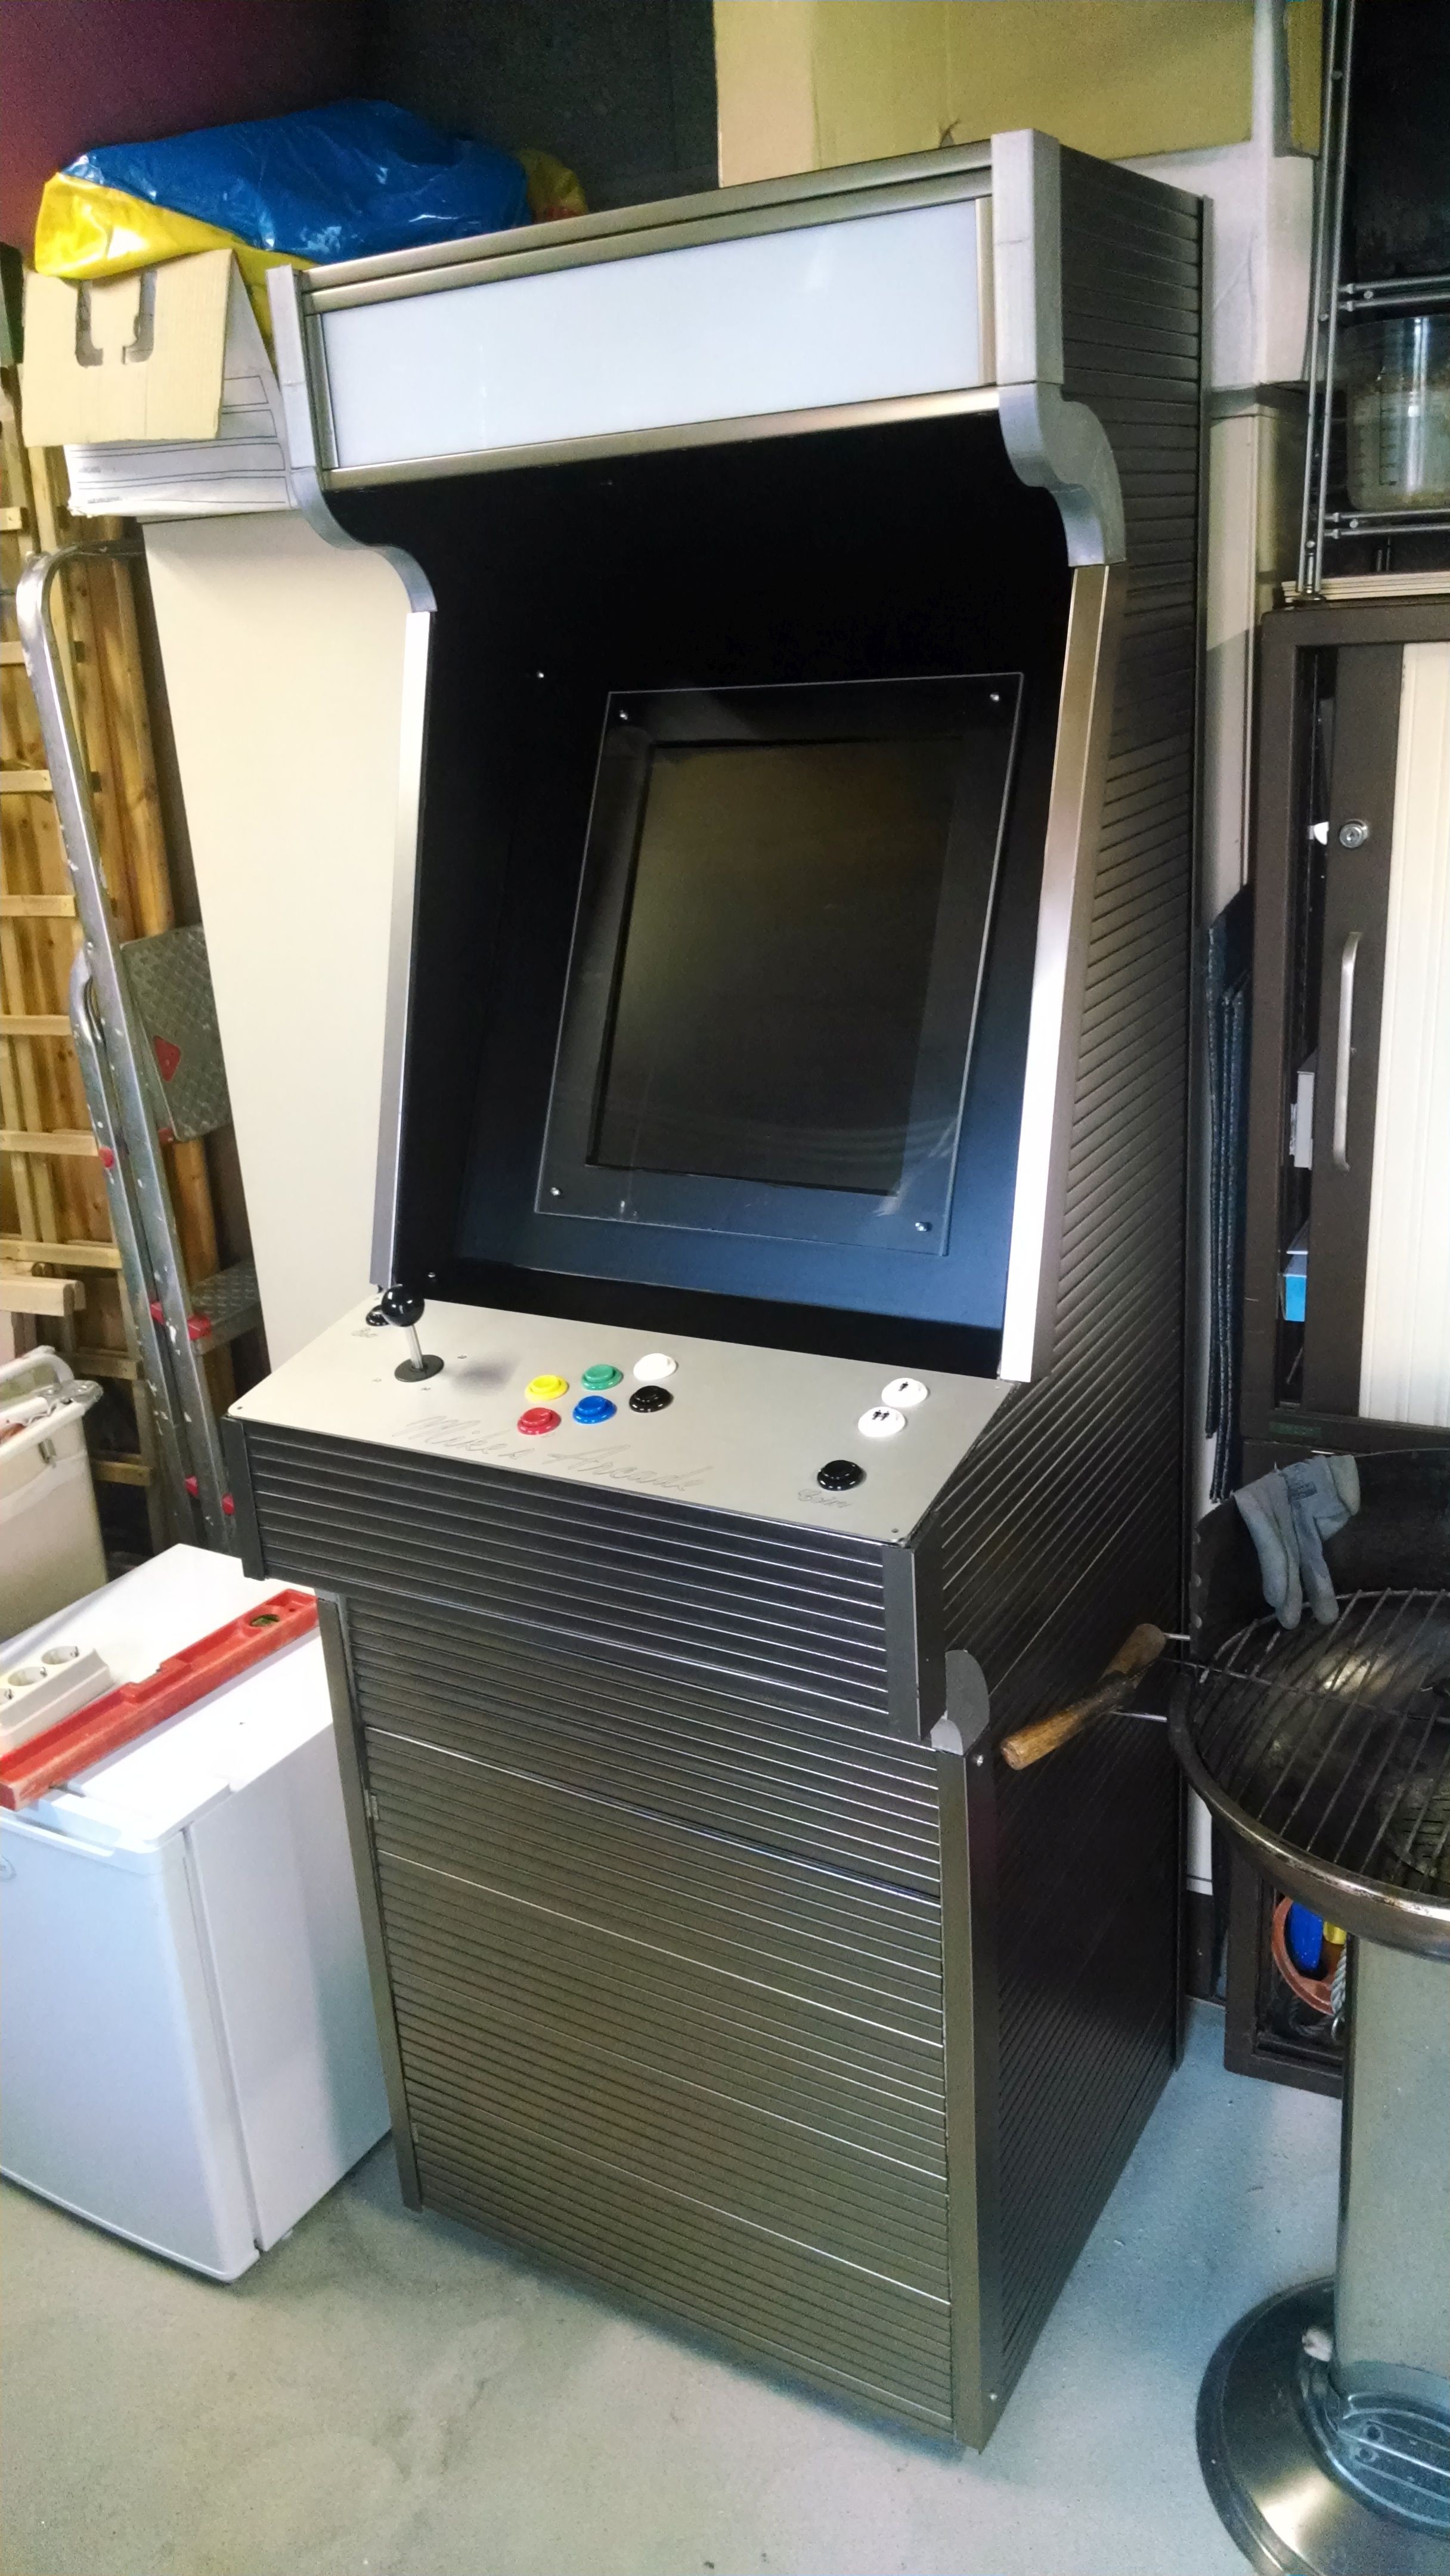 Gallery | Just another Arcade Machine | Hackaday.io